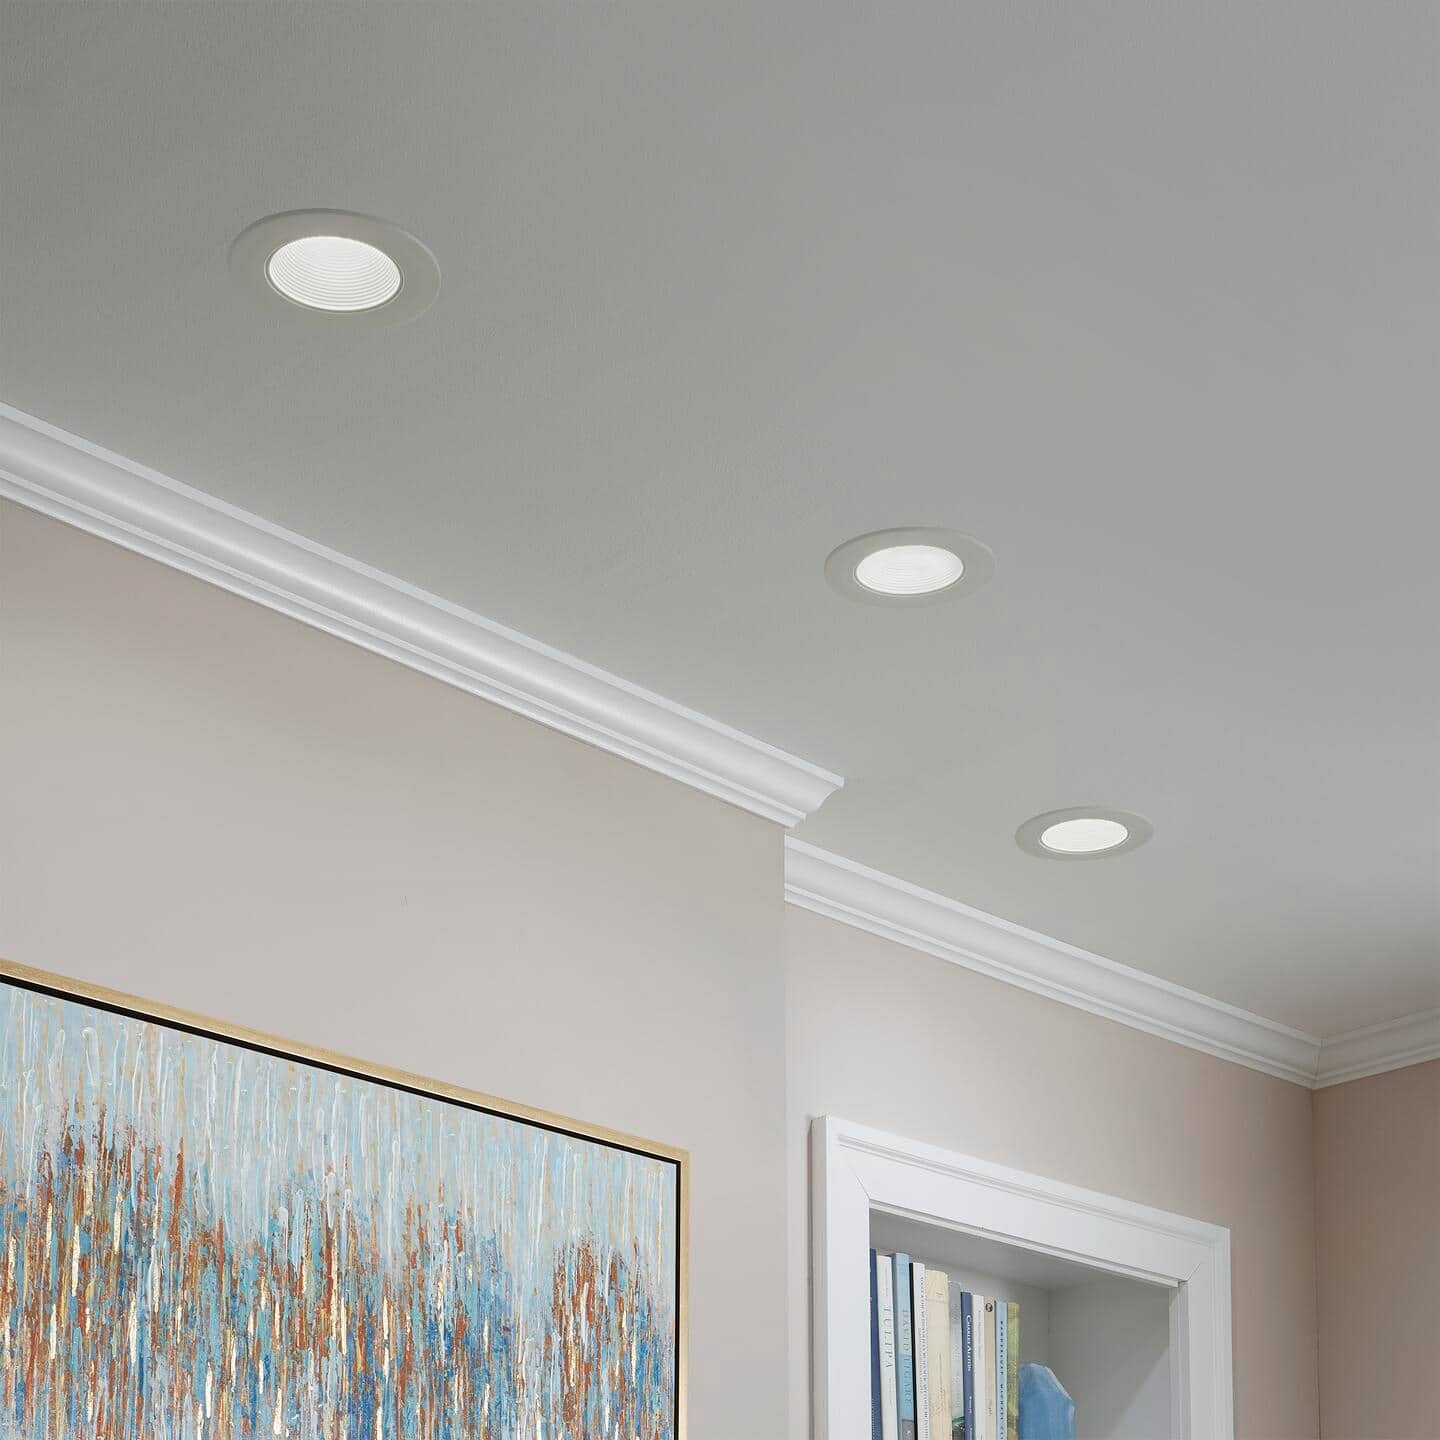 How to wire recessed lighting?